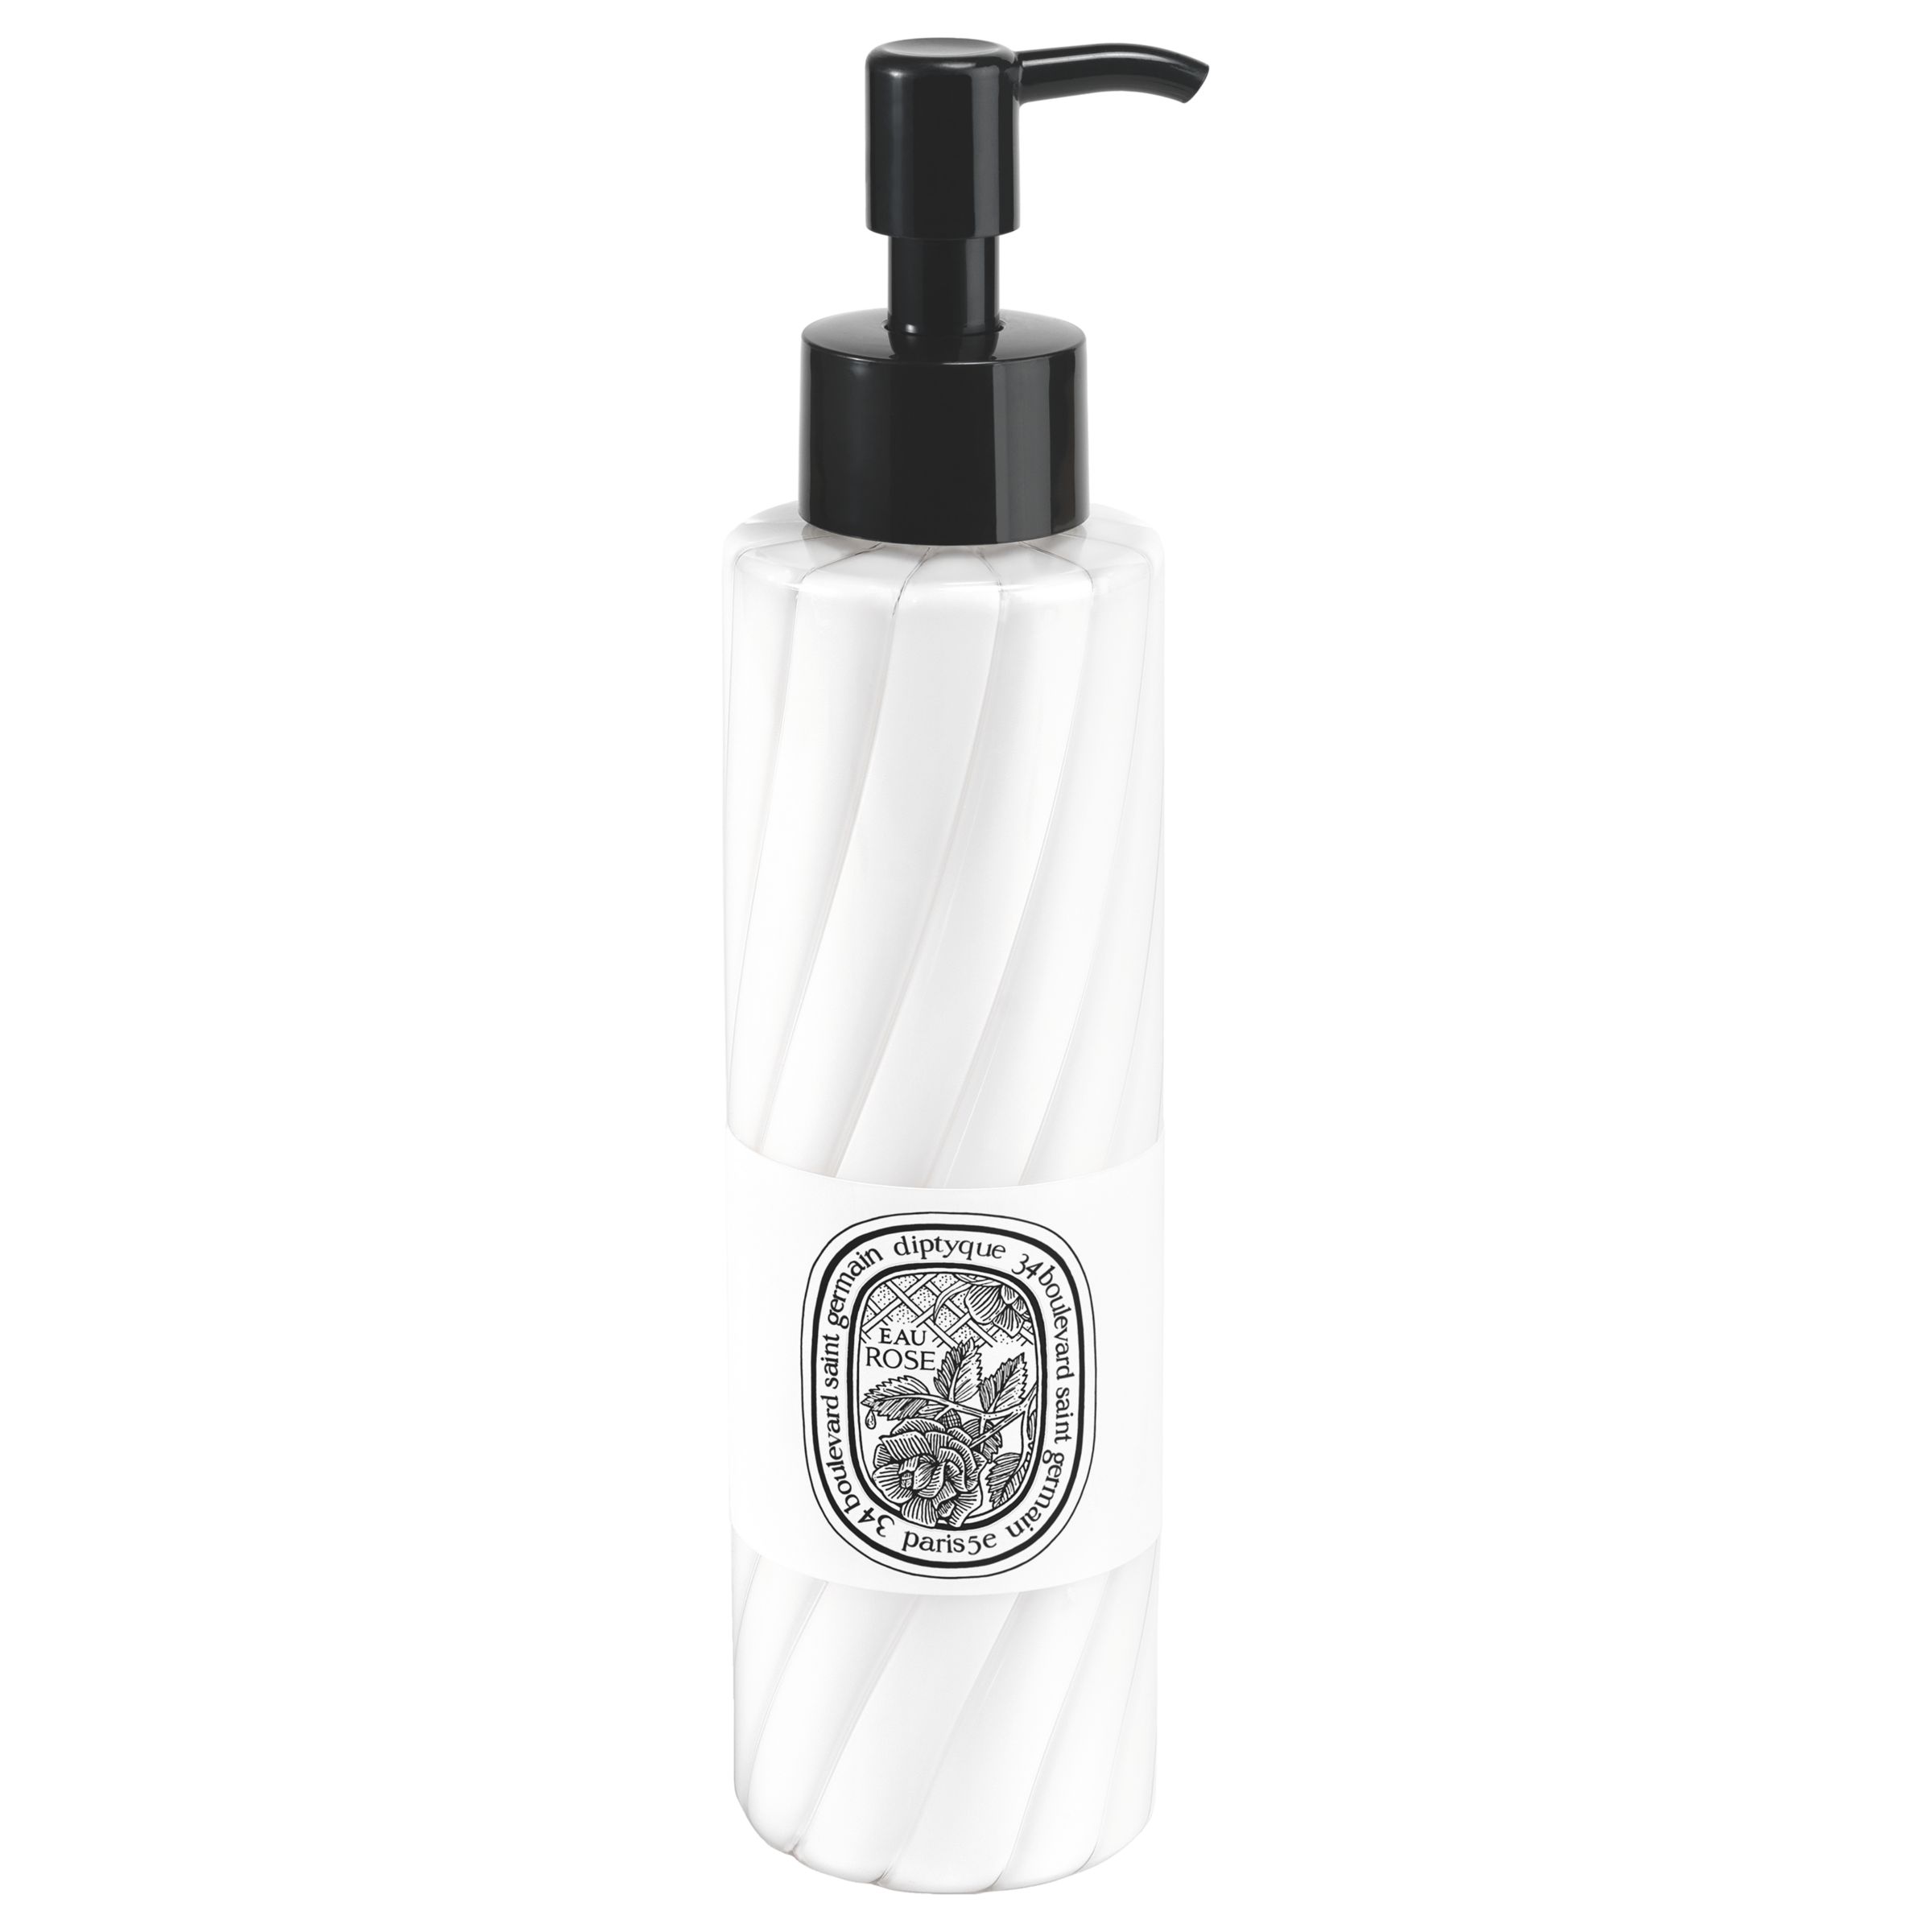 Diptyque Eau Rose Hand & Body Lotion, 200ml 1